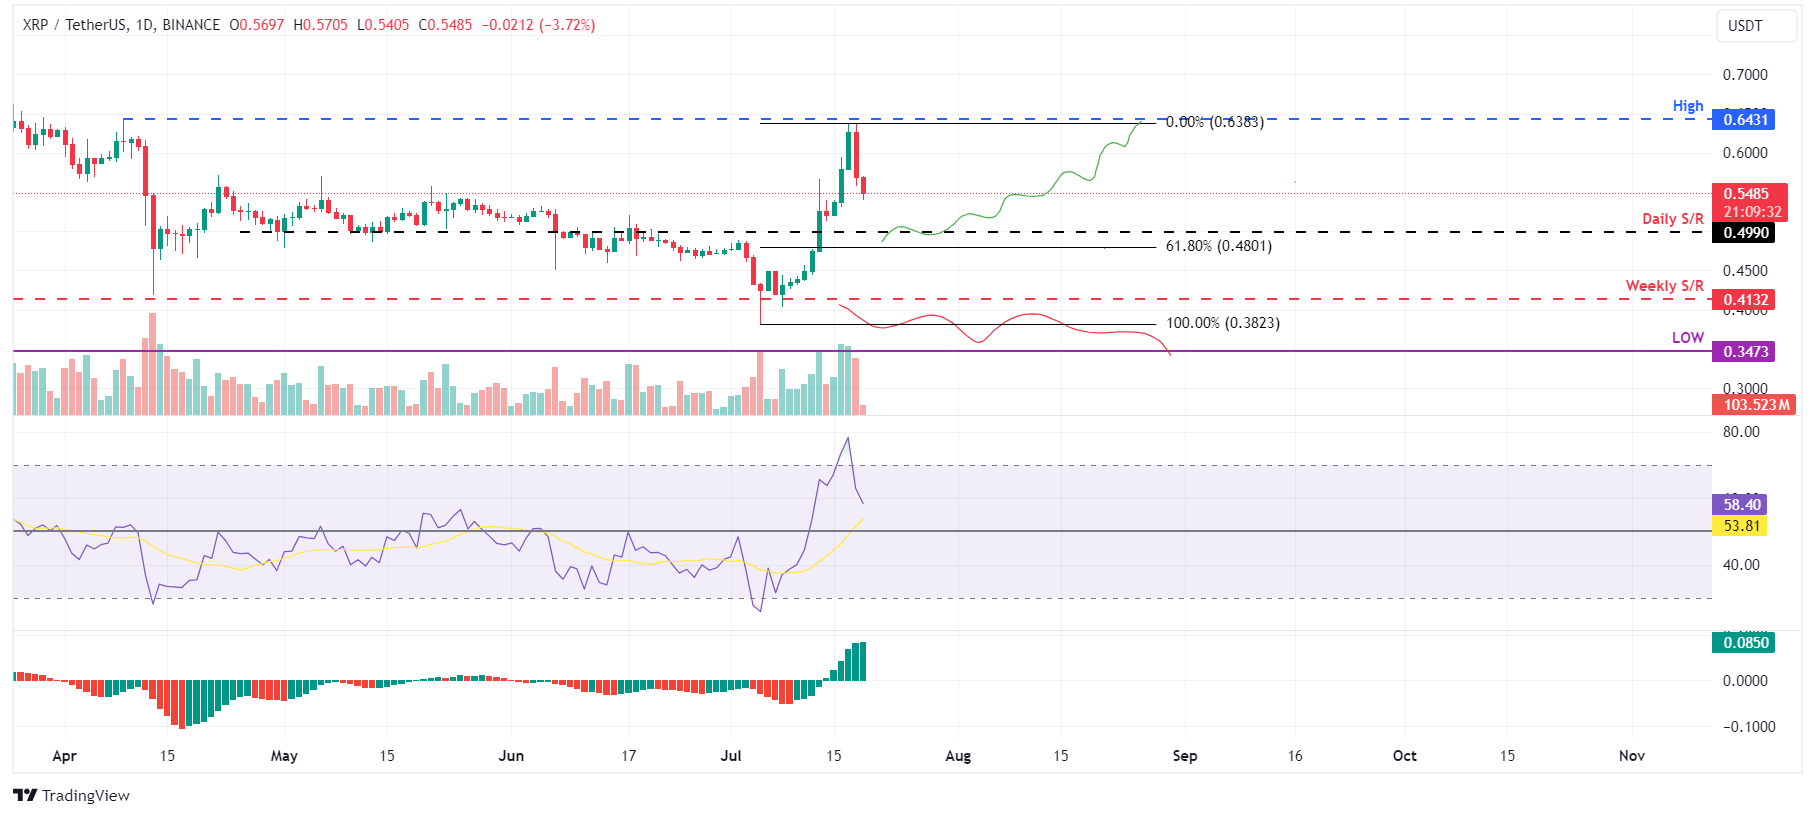 XRP/USDT daily chart